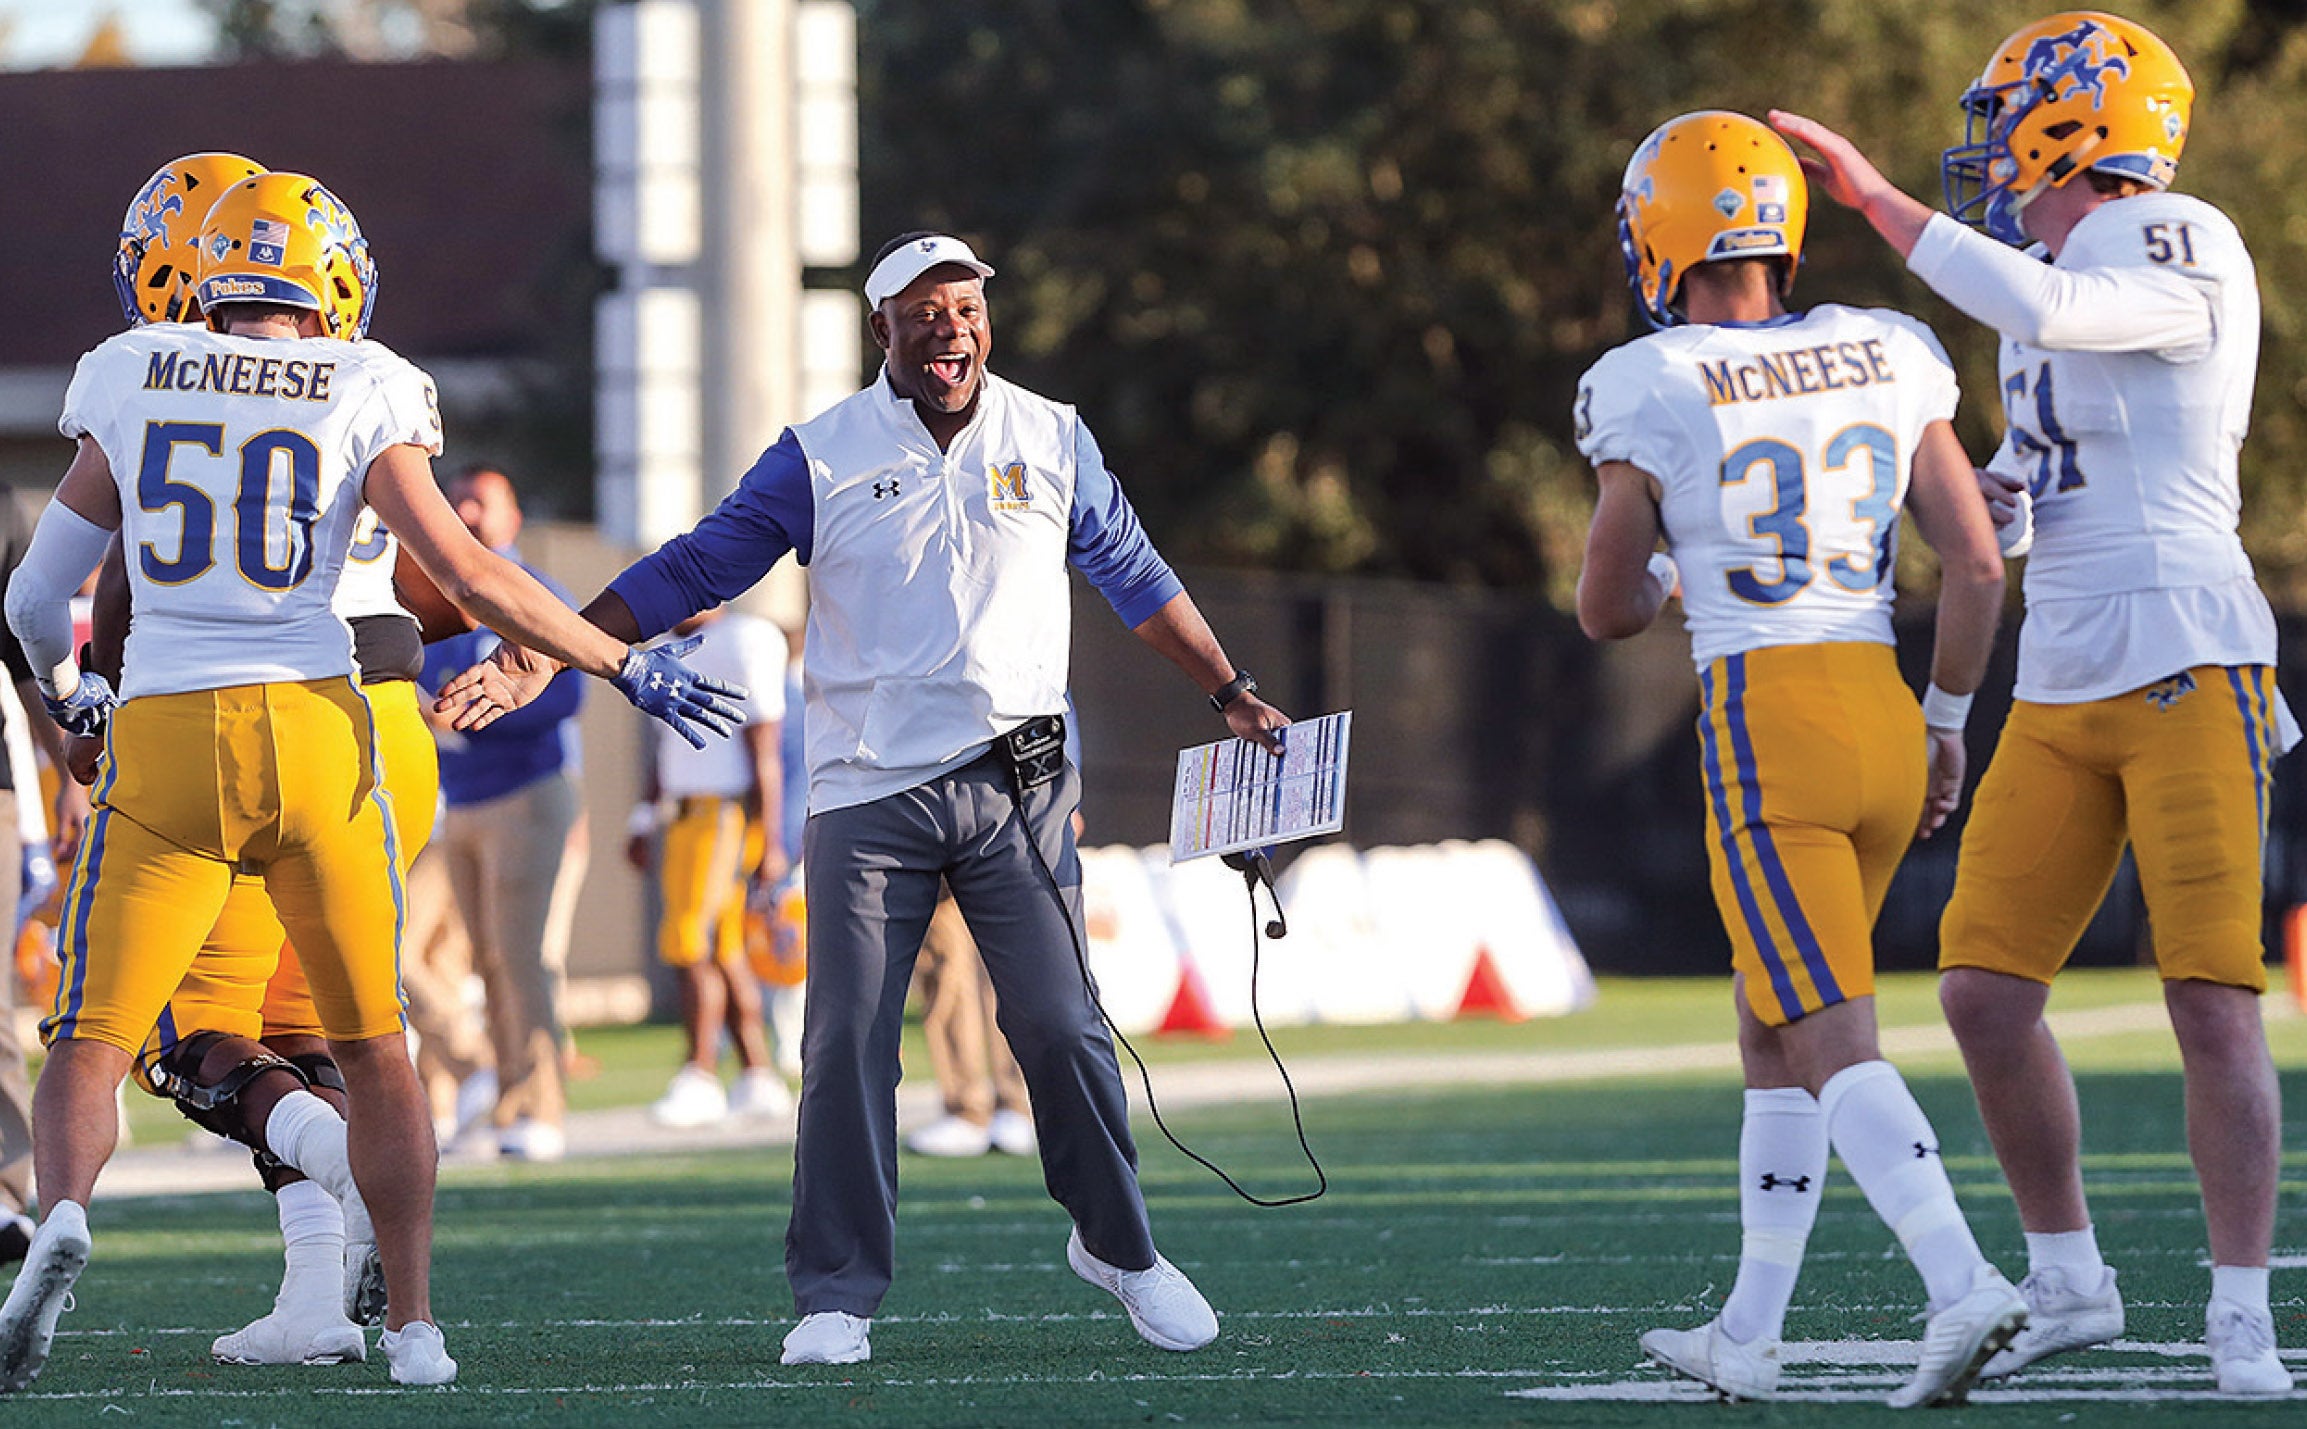 Mcneese Calendar Spring 2022 Wilson Heads Back To Lsu With Two Years Left On Contract At Mcneese -  American Press | American Press